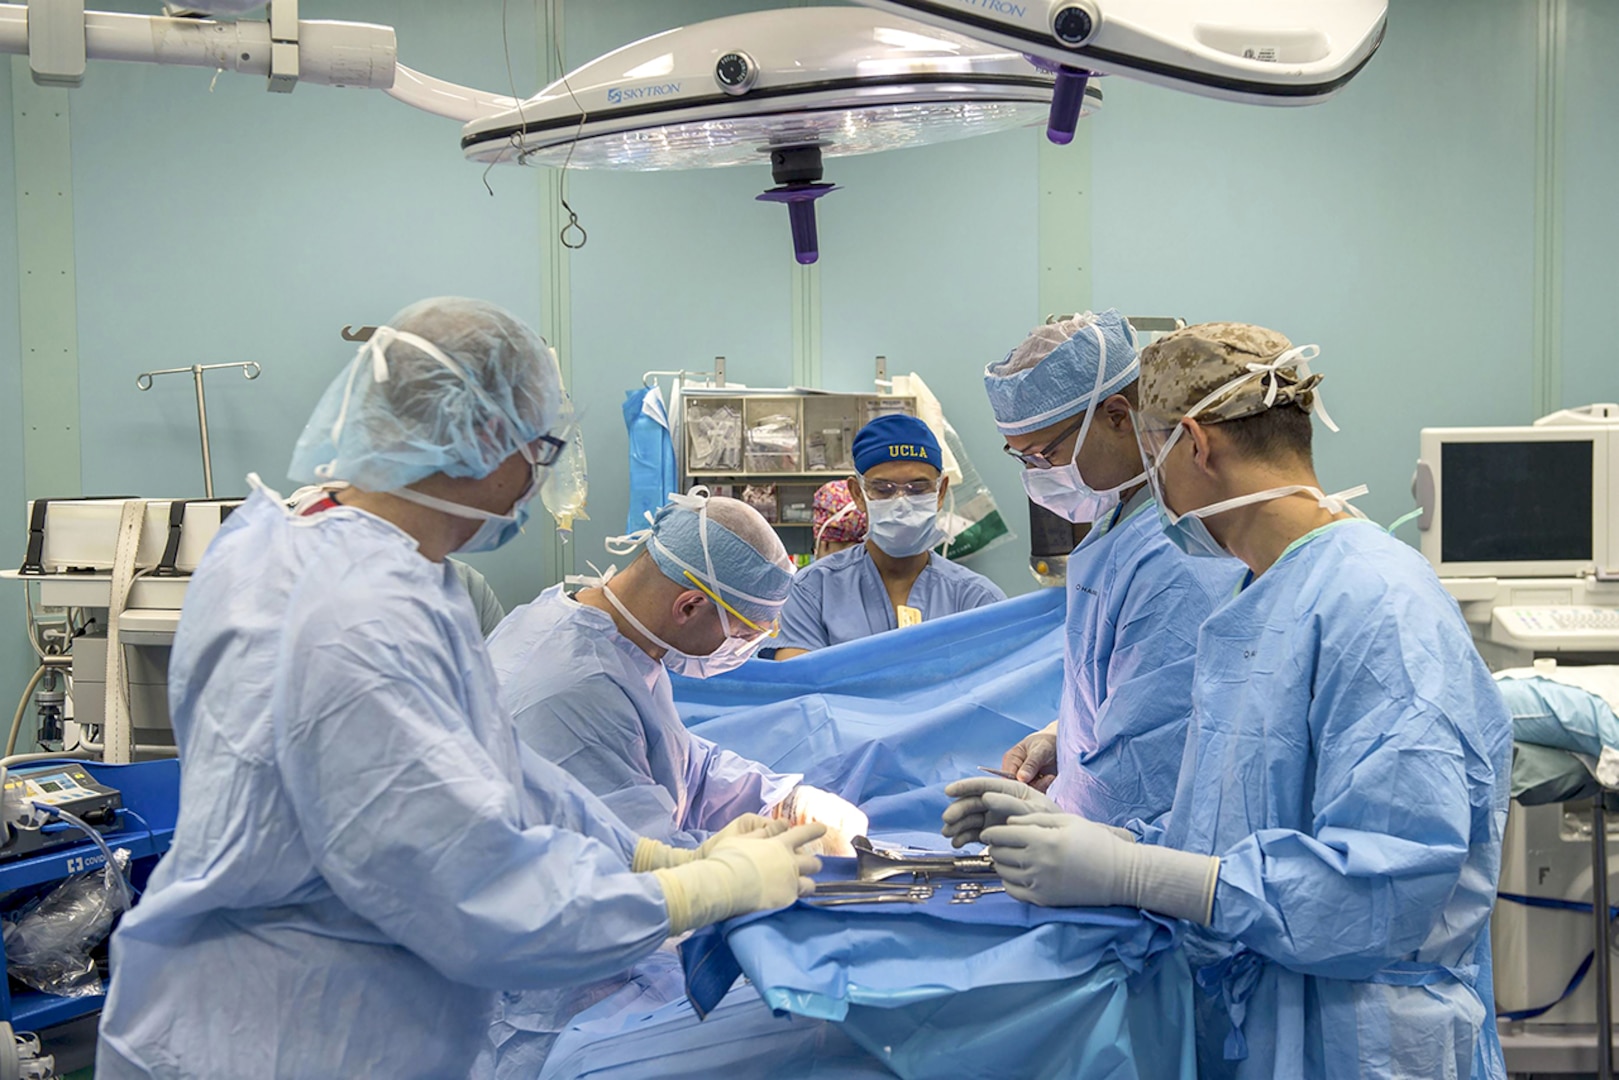 Sailors perform a surgical operation in an operating room aboard the hospital ship USNS Comfort in the Caribbean Sea. The Comfort is providing medical services to people affected by Hurricane Maria, with supply support from DLA.